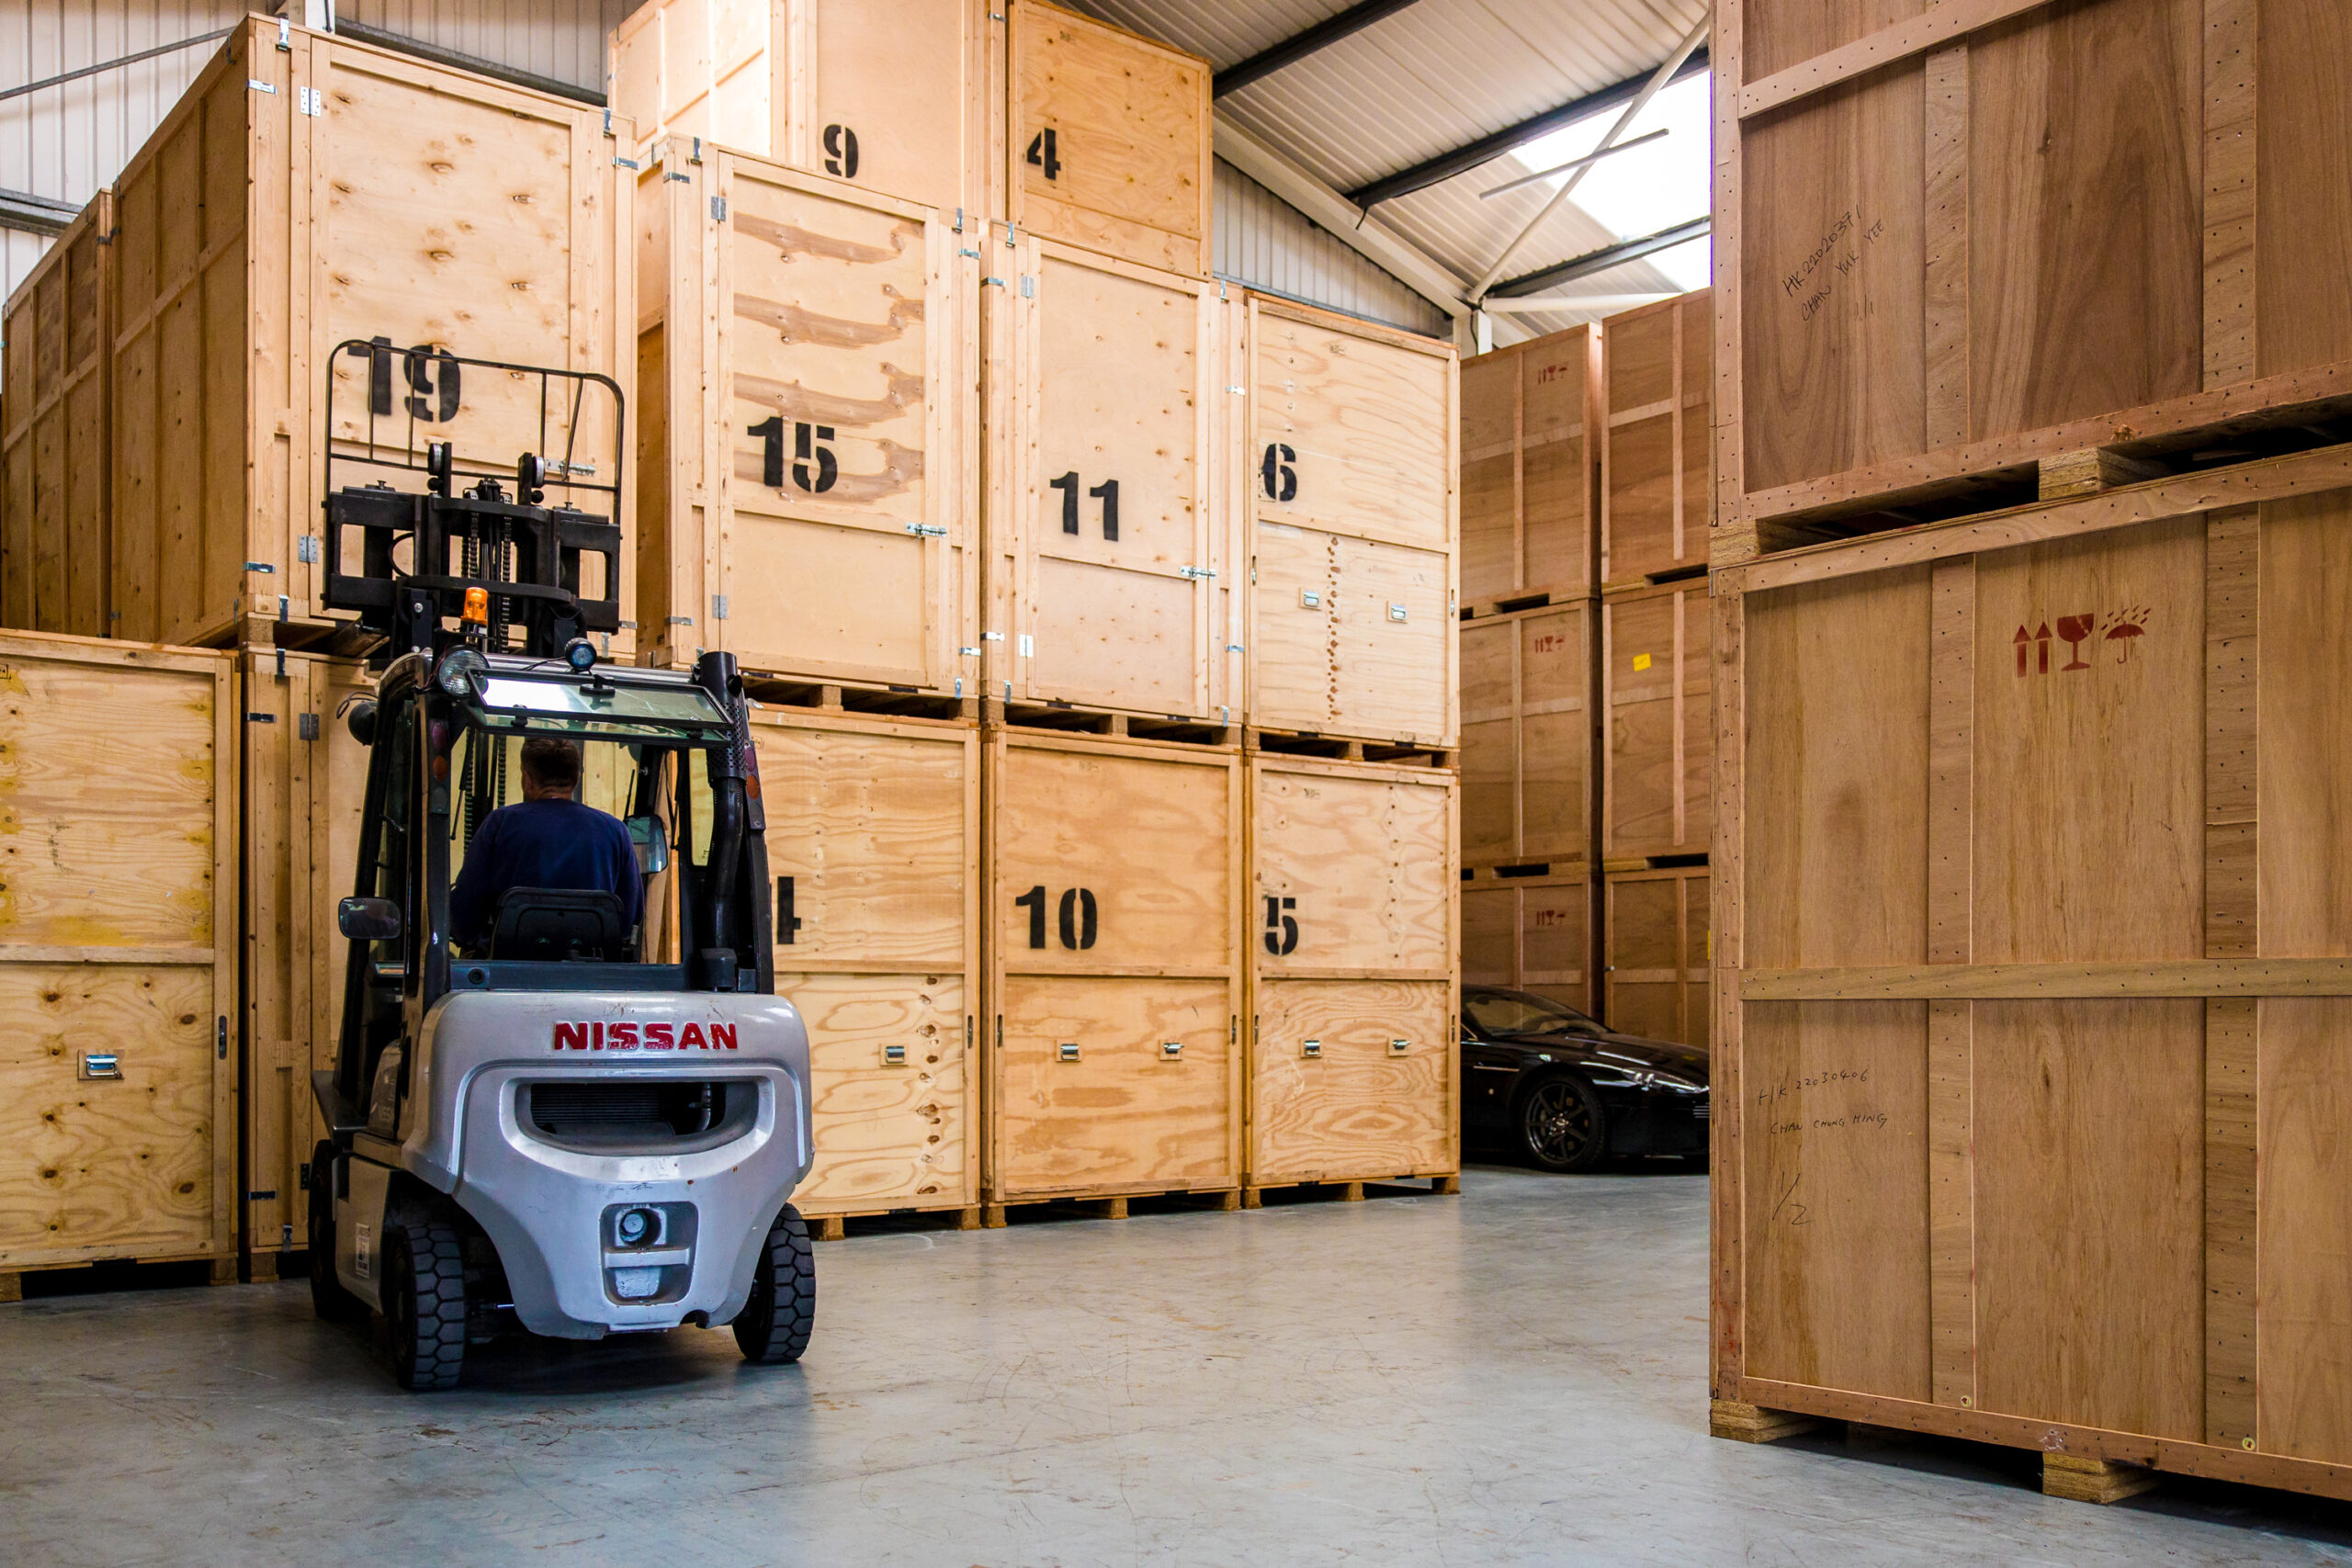 A forklift truck manoeuvring in a warehouse, transporting large wooden storage boxes efficiently.